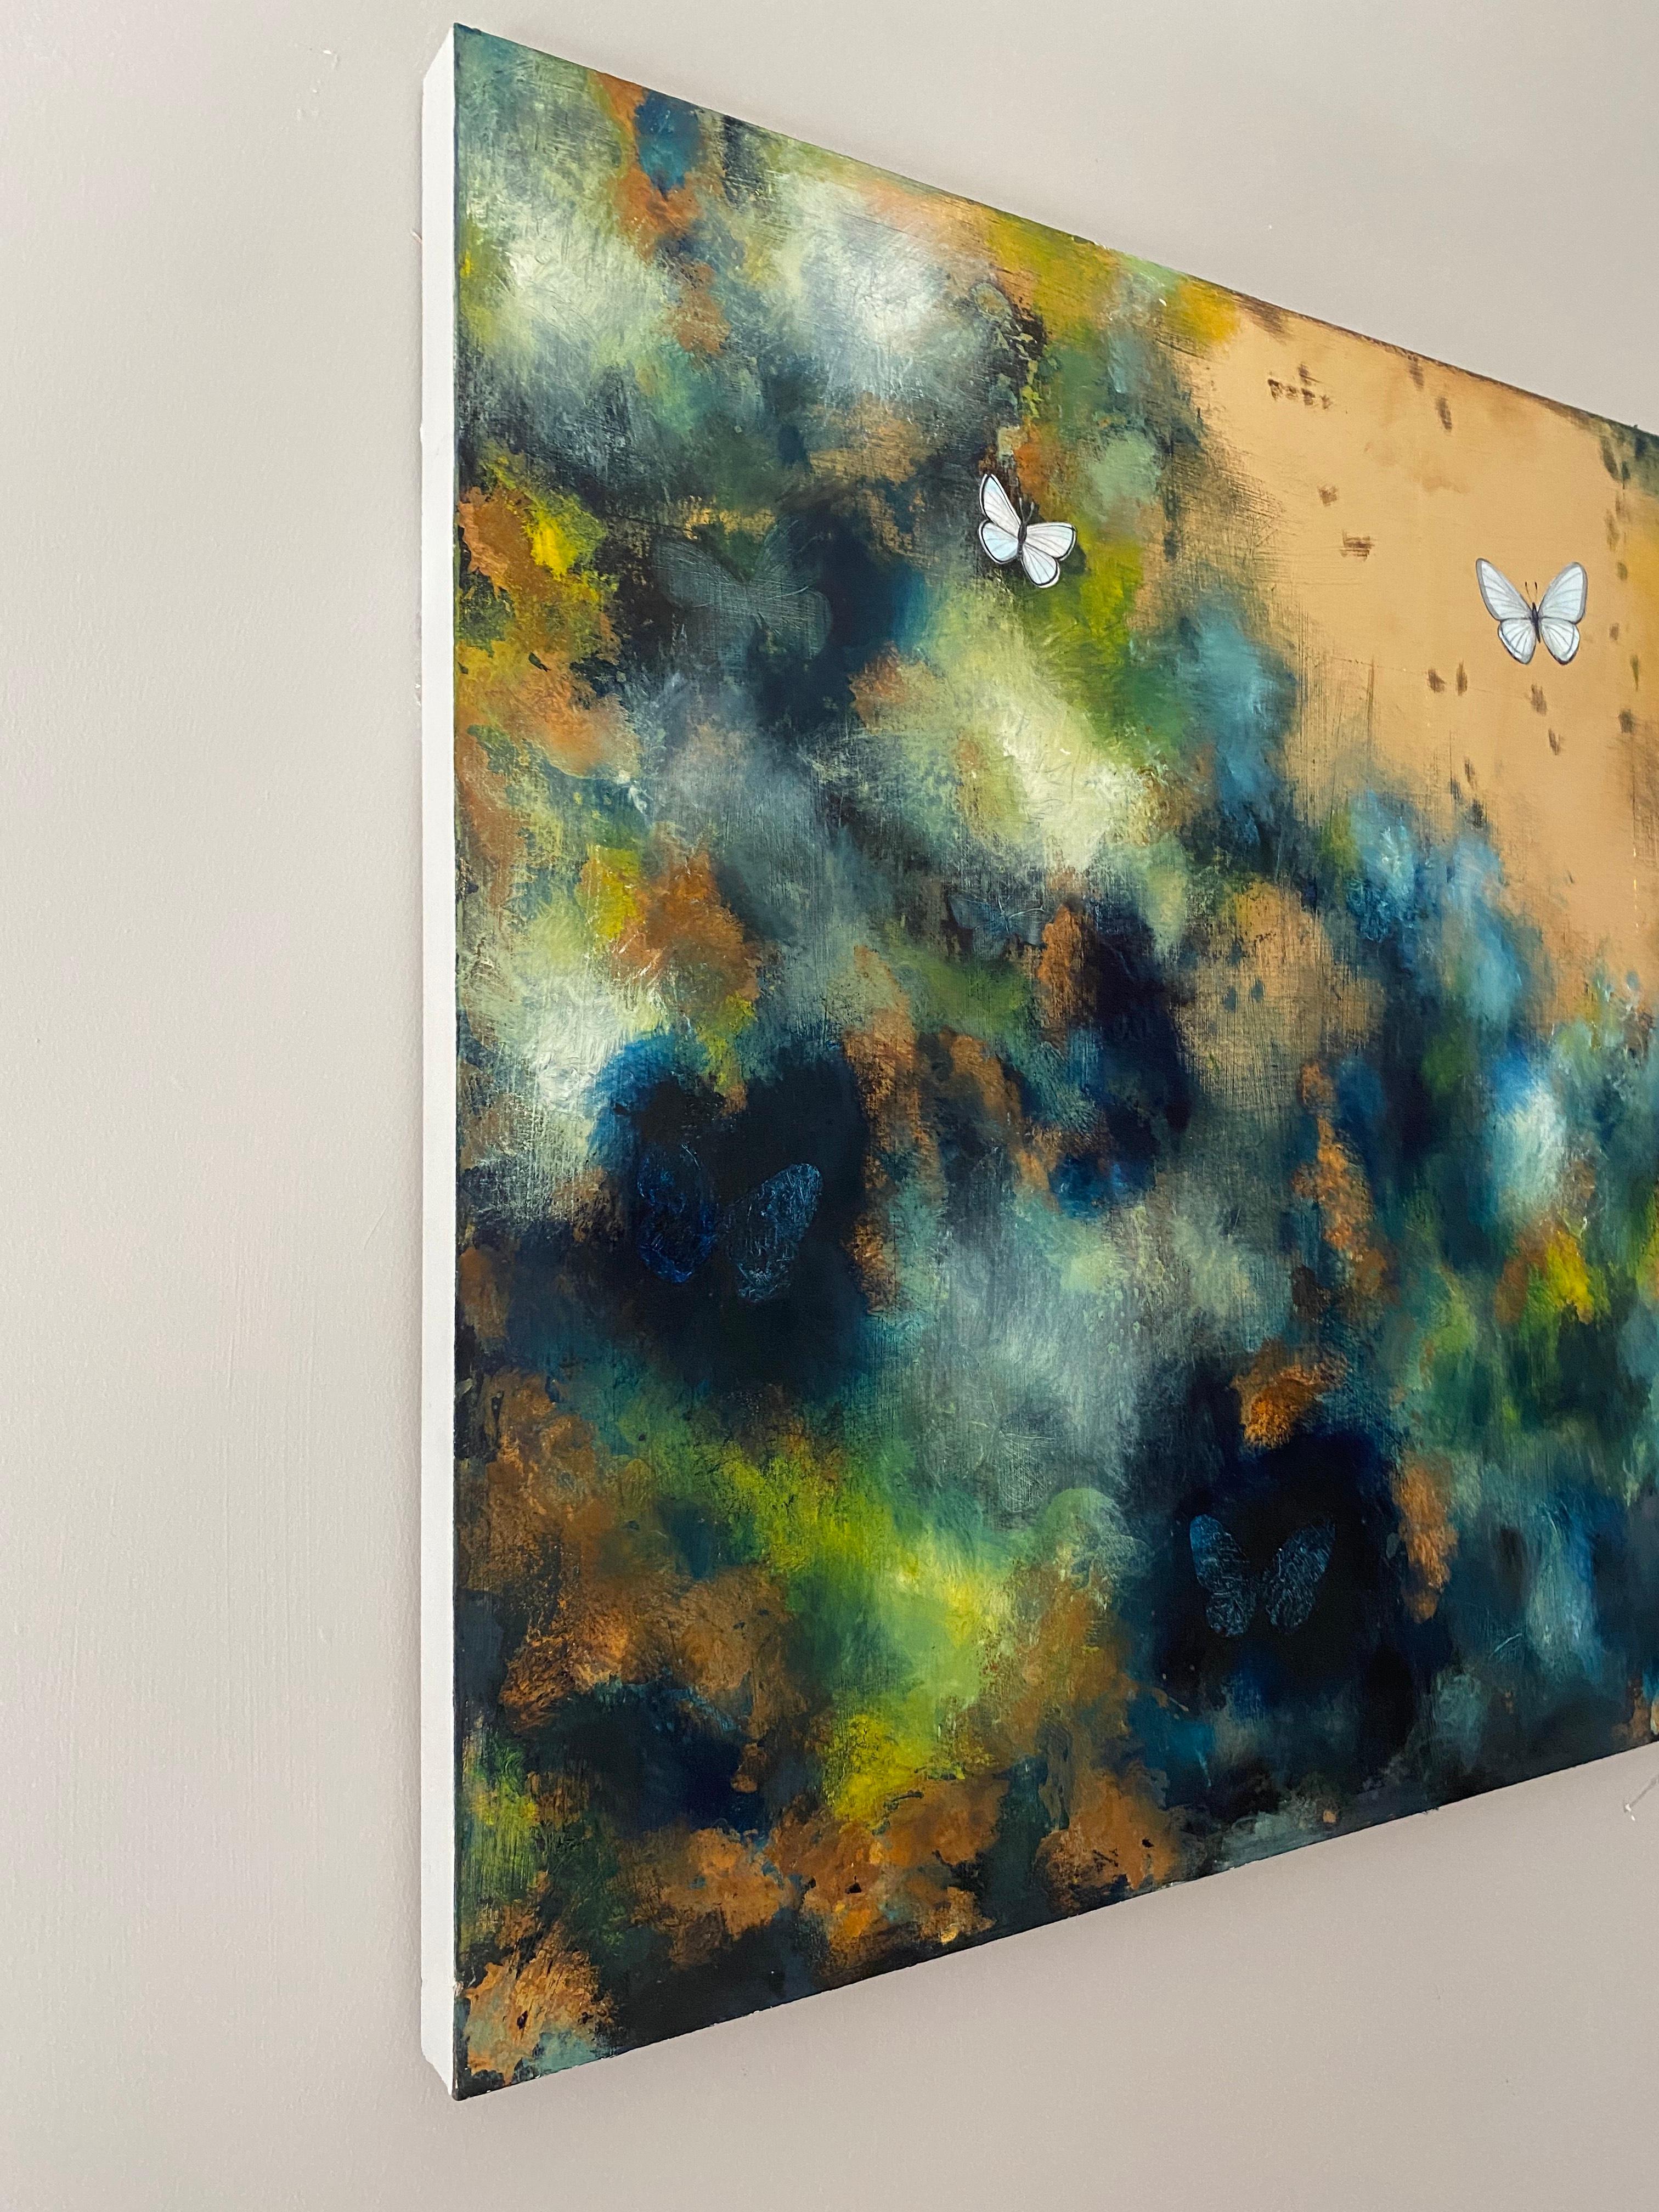 Kate shares this painting was pure joy to work on. The rust elements reflect a changing world-our environment. The colours in the oil paint and abstract landscape as well as the butterflies show an ever hopeful ideology that everything will be